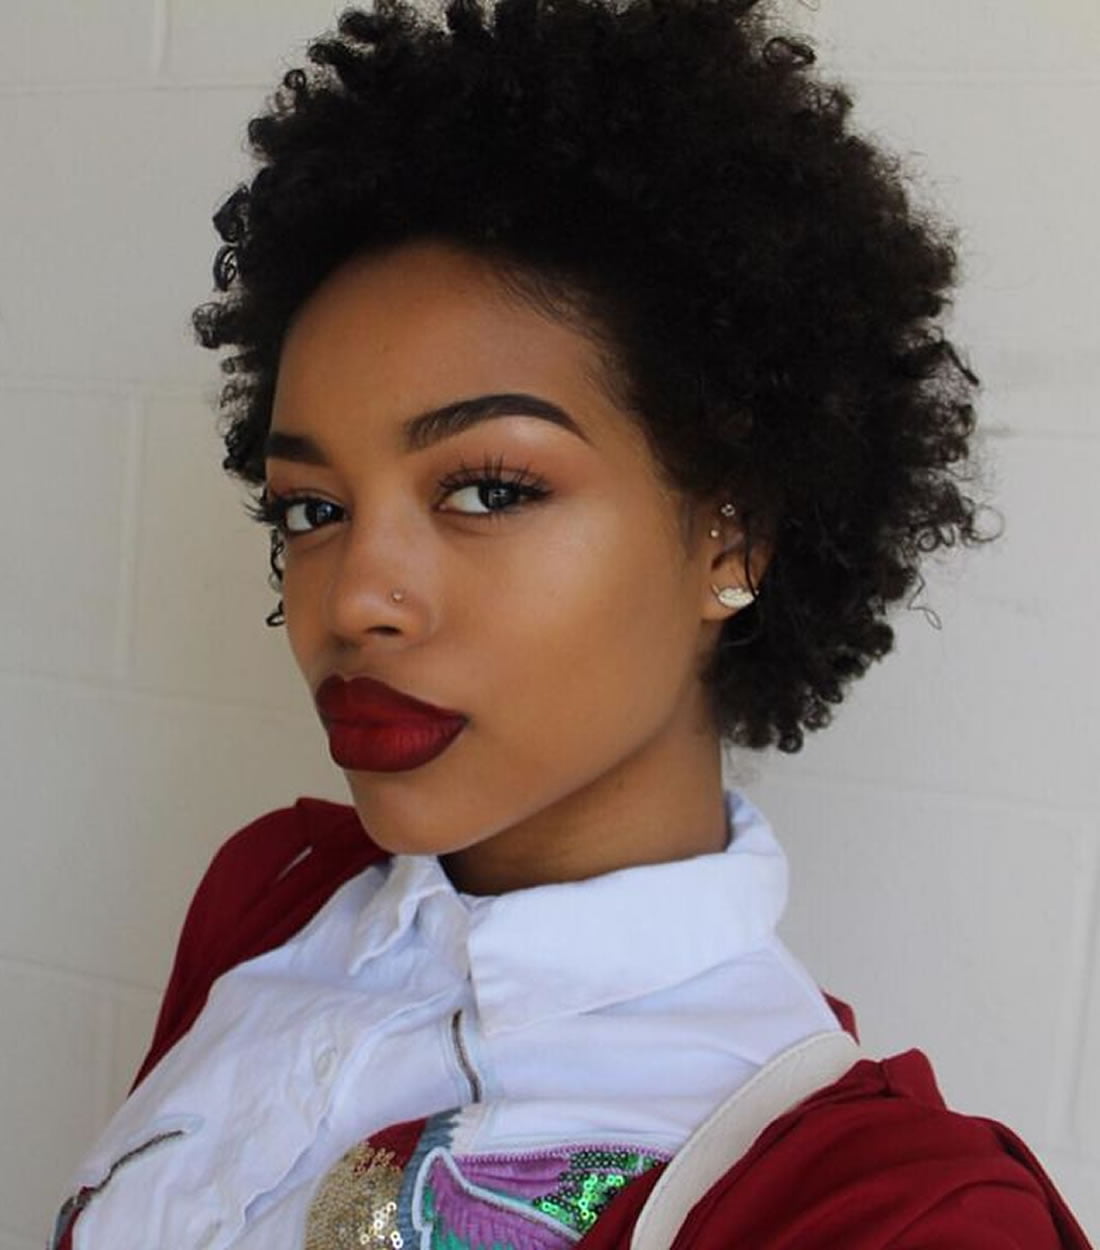 New 2018 Short And Very Short Hair Ideas For Black Women HAIRSTYLES